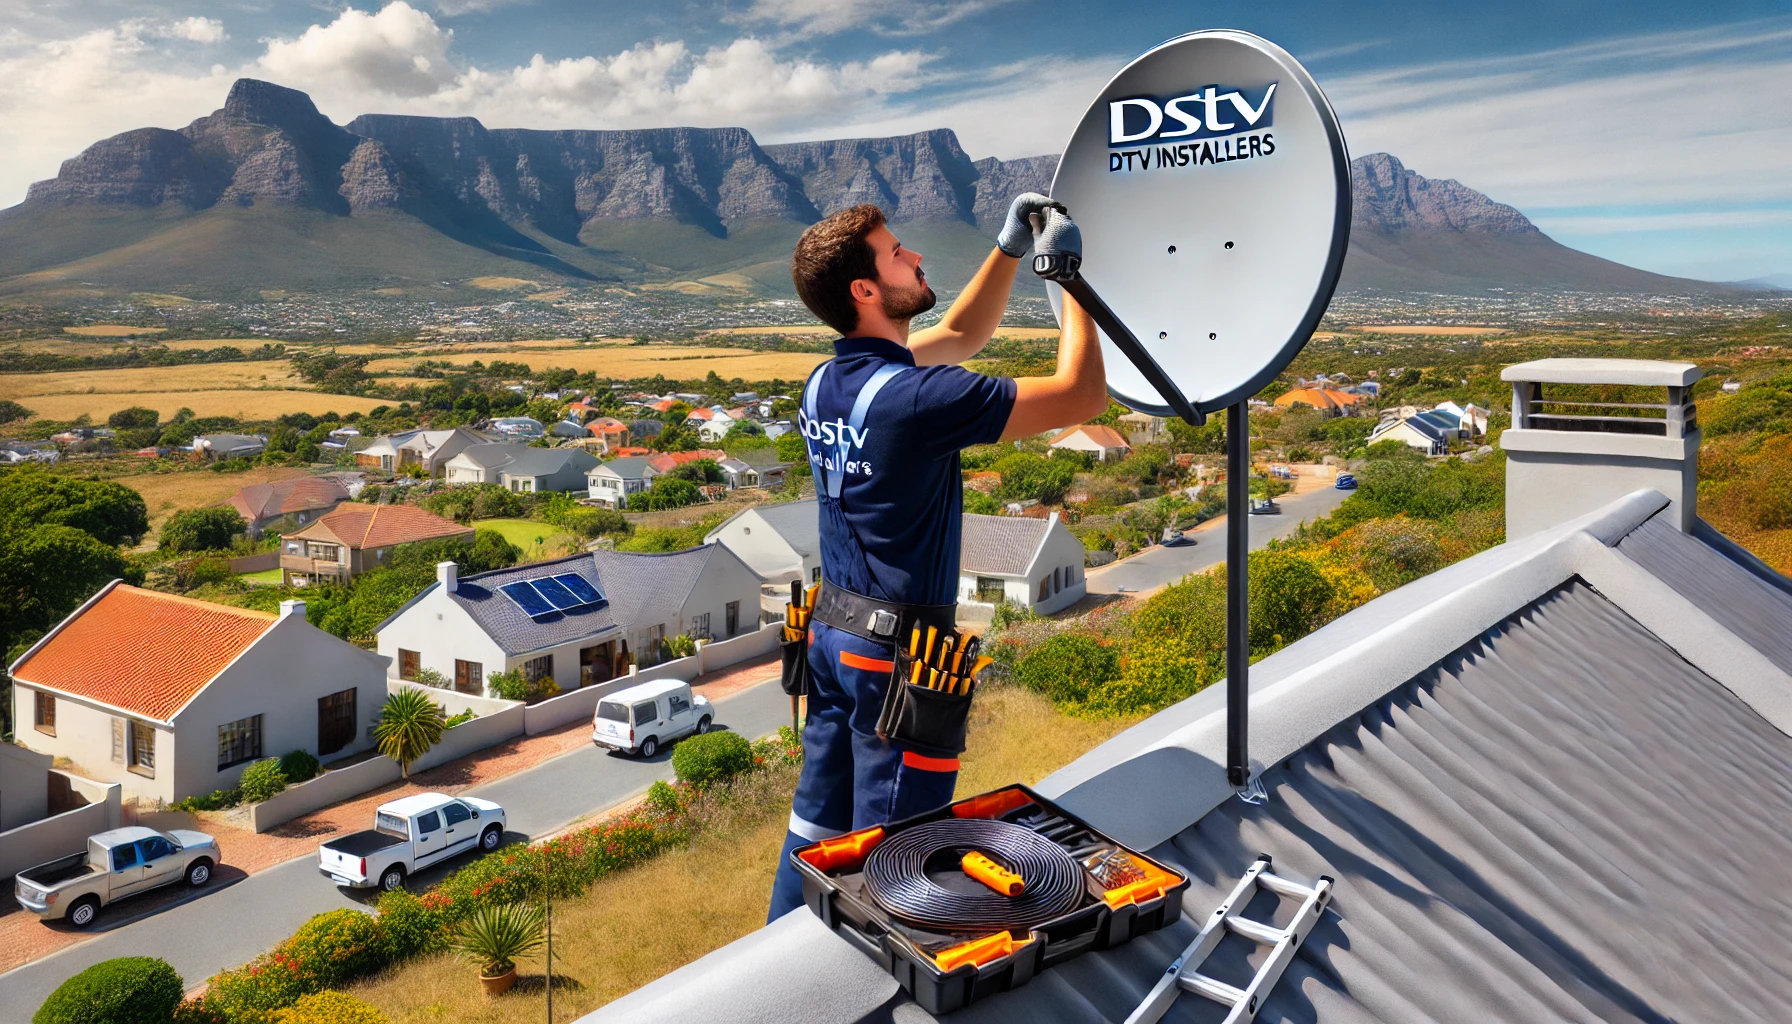 What Causes Certain Channels Not To Work On DStv? Now What To Do